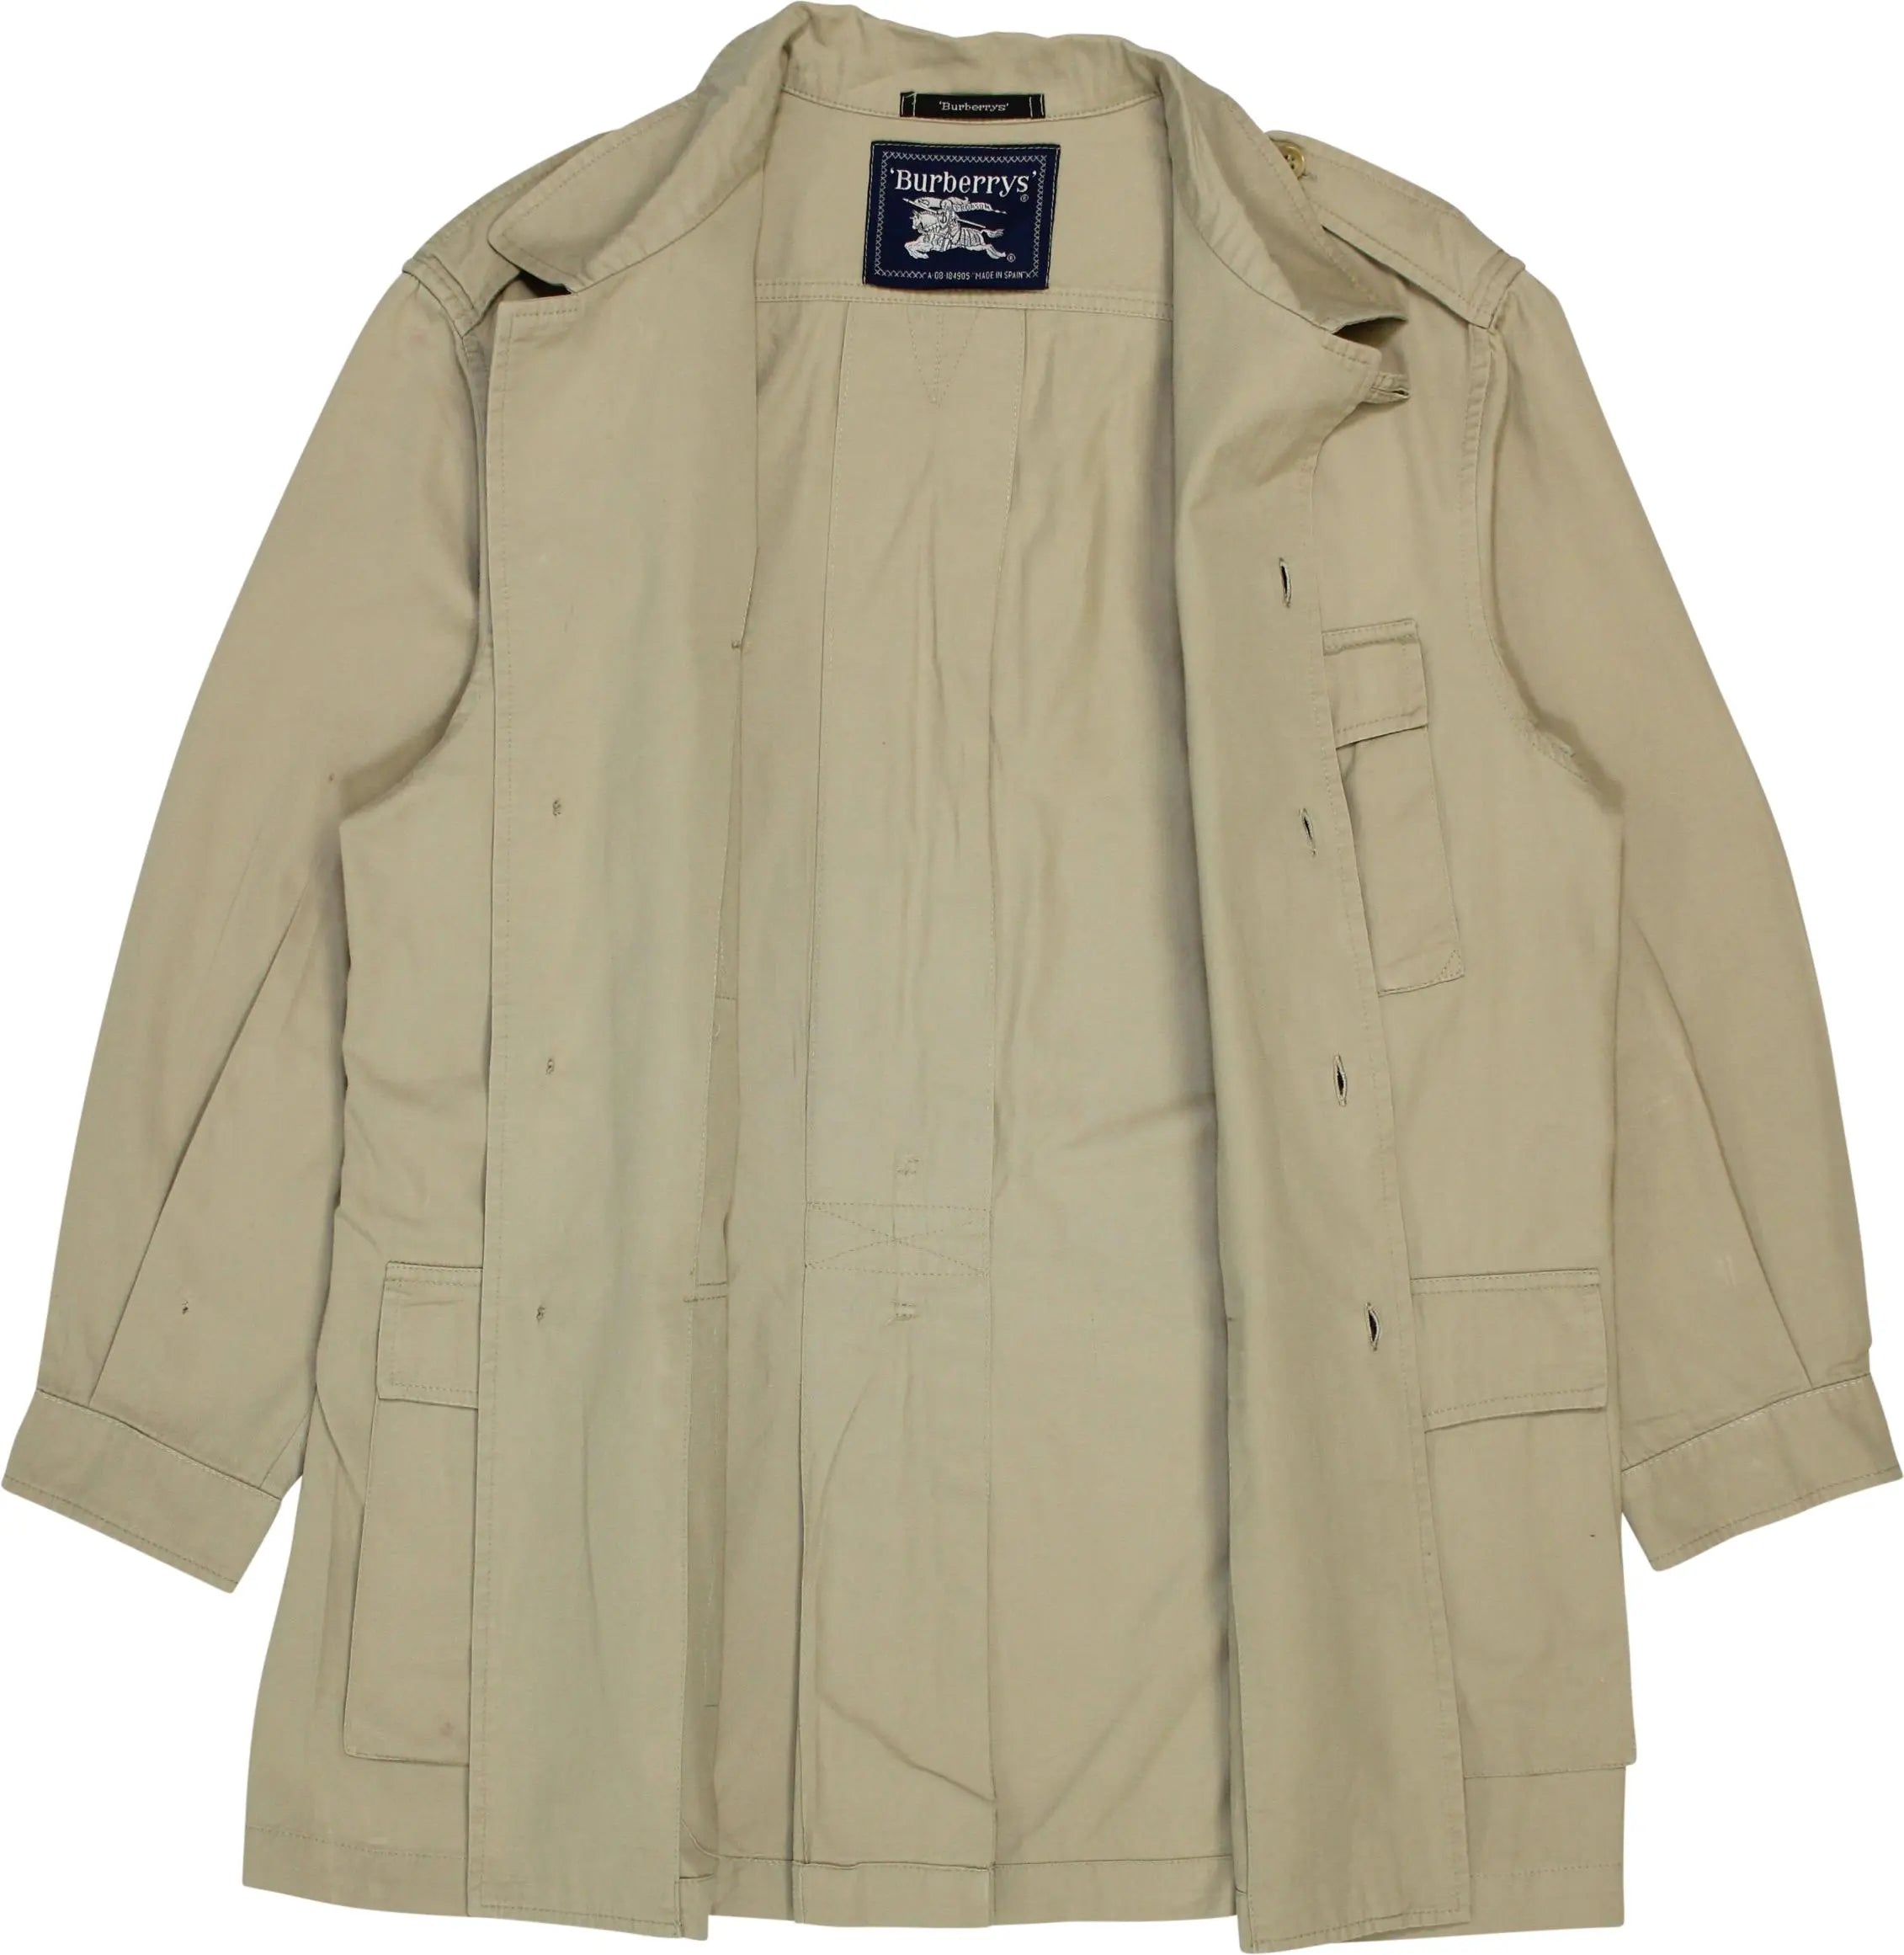 Burberry - Utility Shirt by Burberry- ThriftTale.com - Vintage and second handclothing